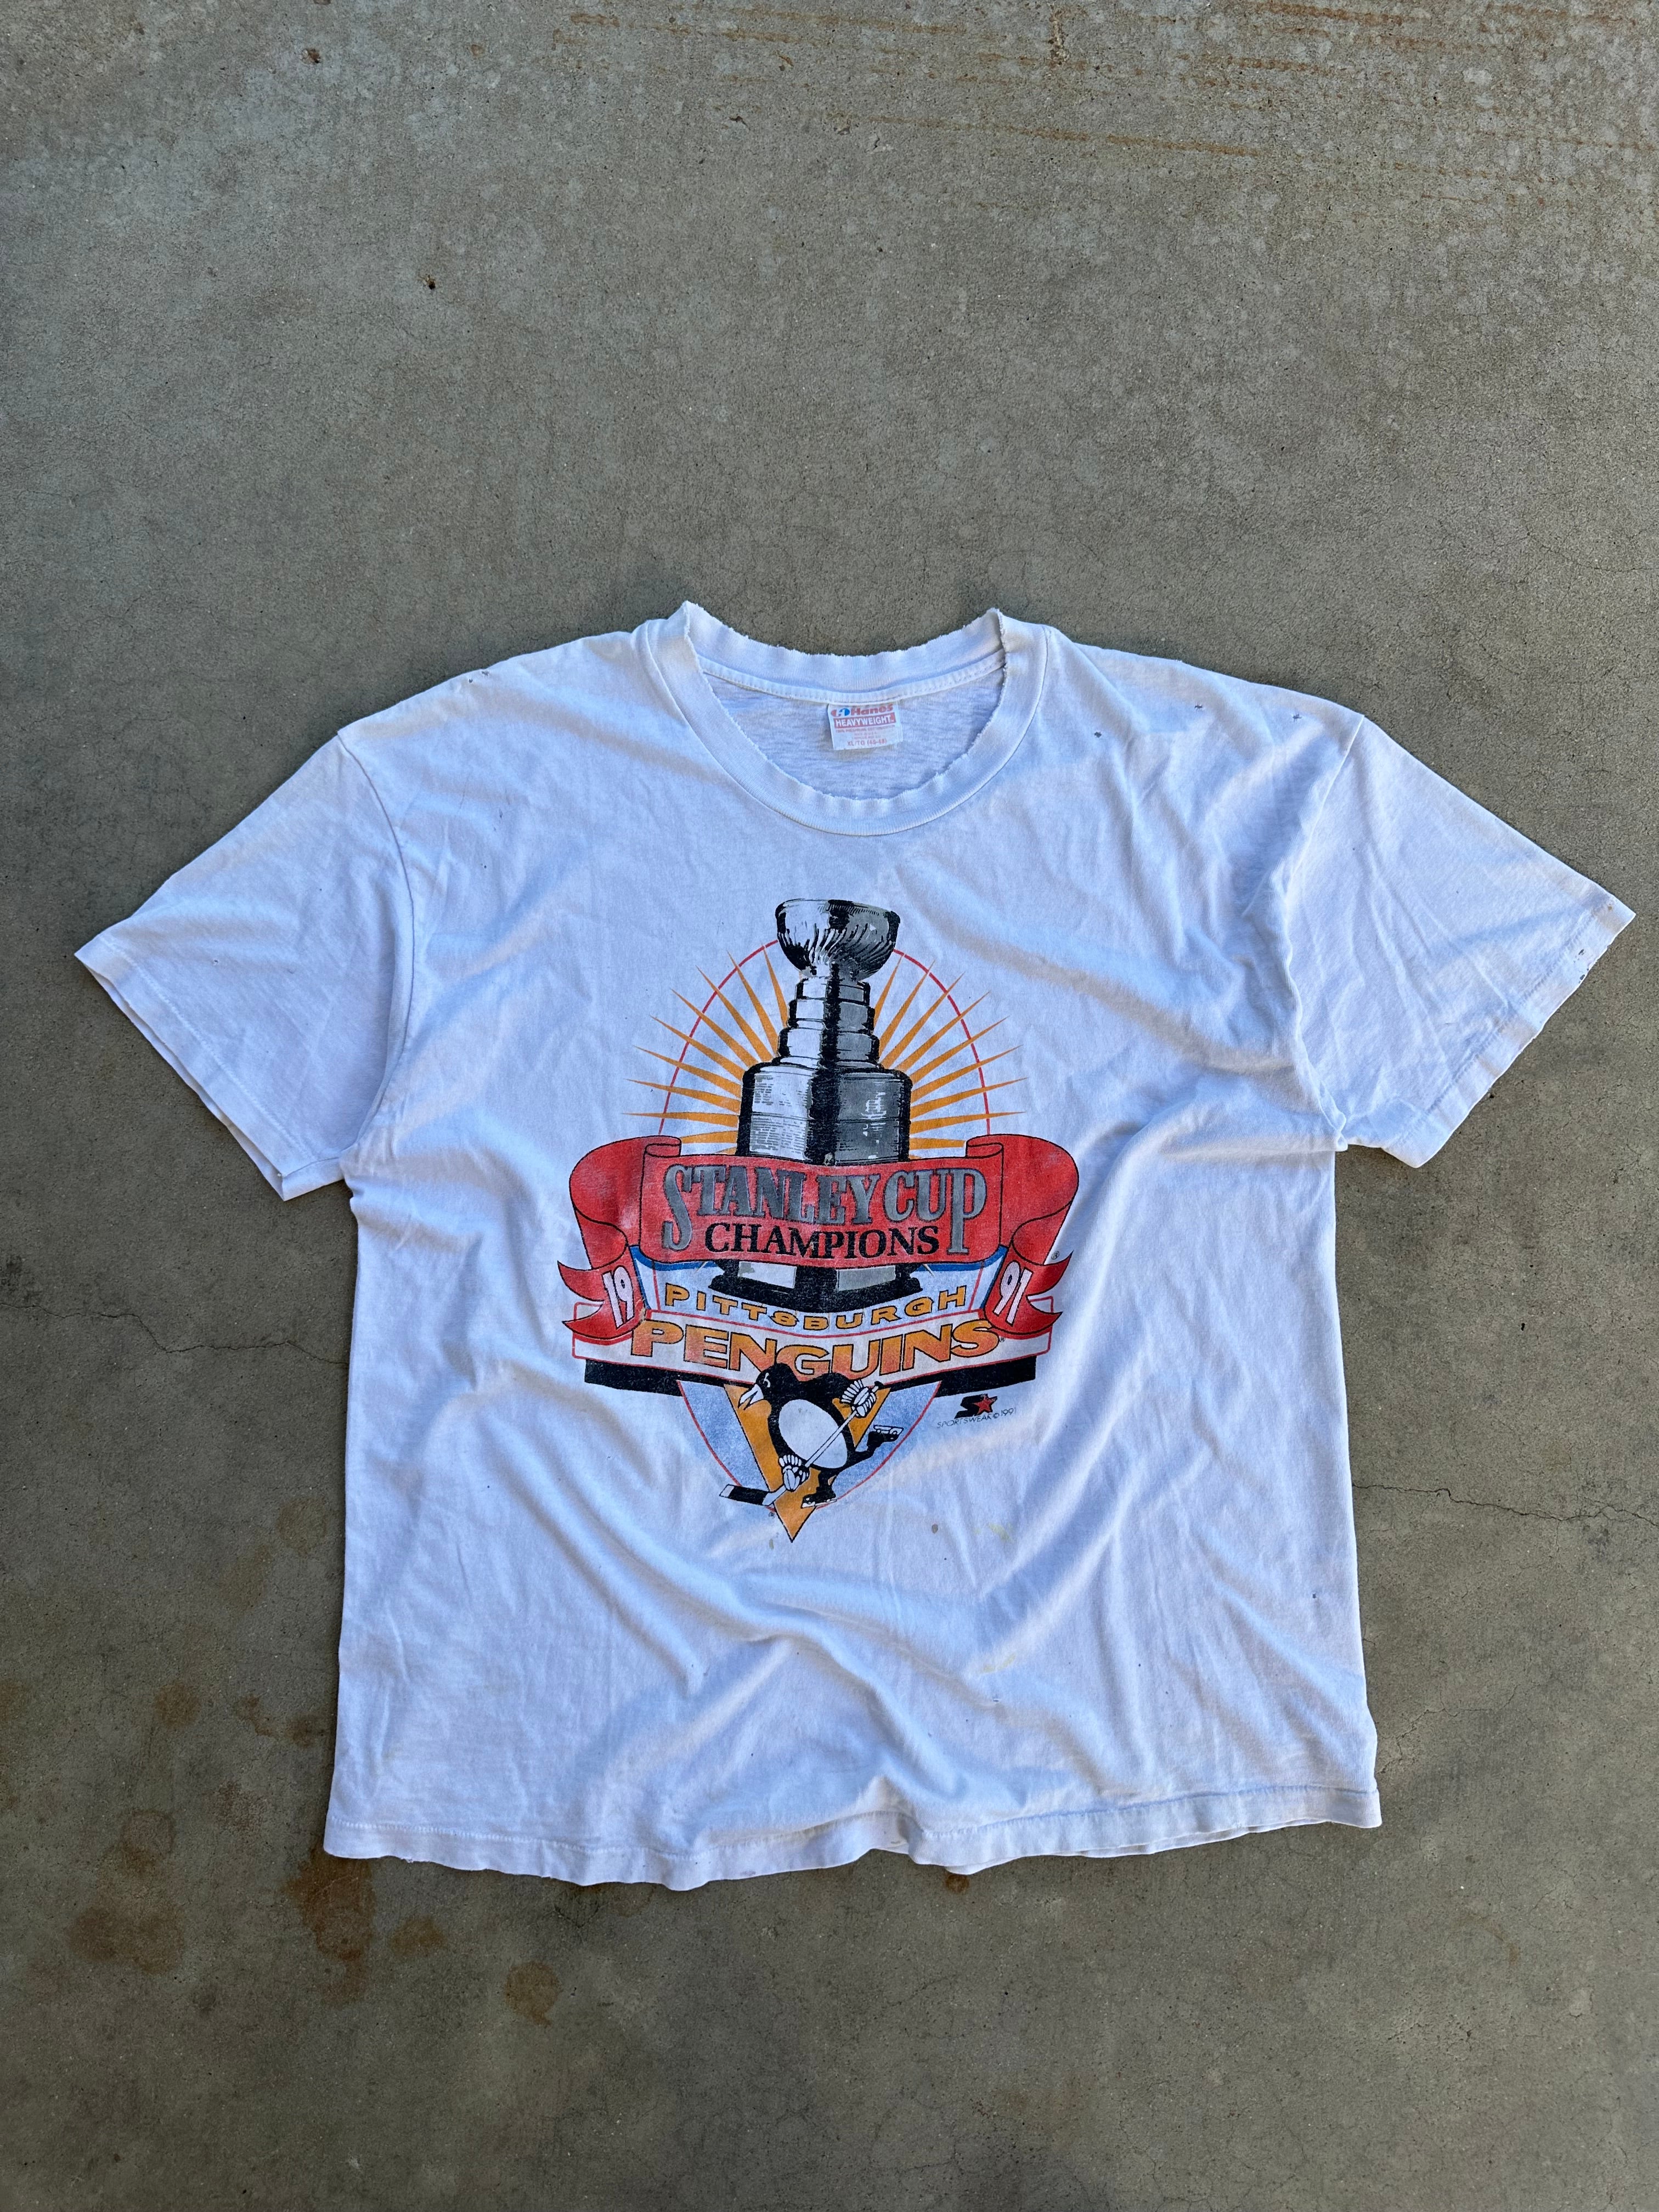 1991 Thrashed Stanley Cup Champion T-shirt (XL)